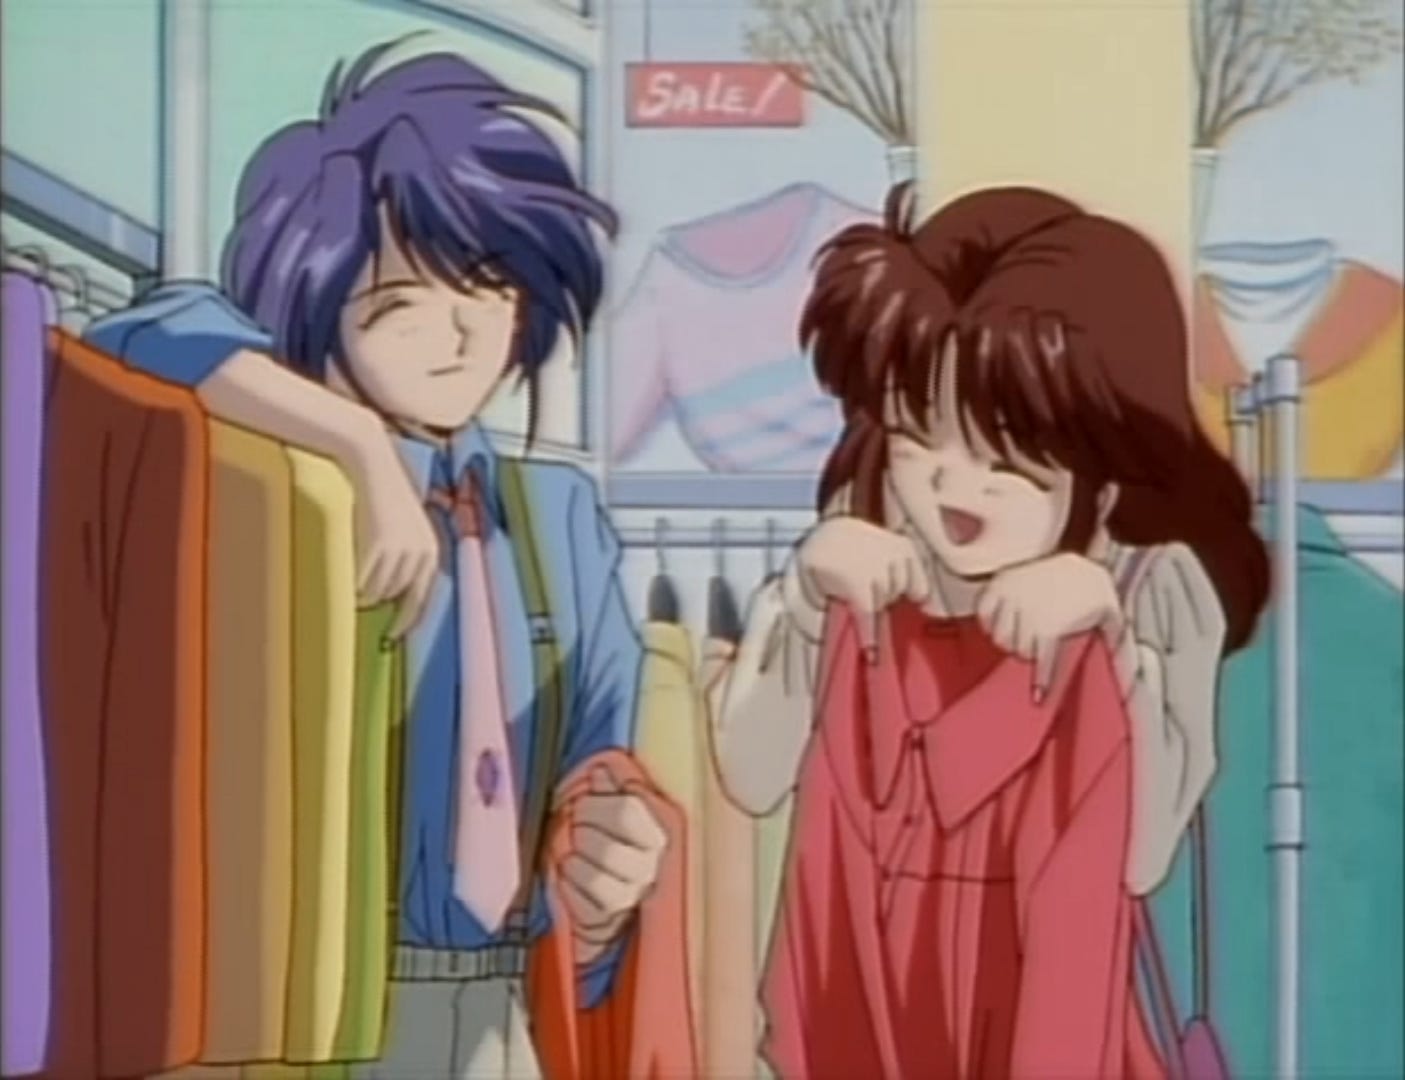 Nuriko with short cropped hair, blue dress shirt, green suspenders, and pink tie clothes shopping with Miaka, who is holding up a pink blouse, in the "real world"